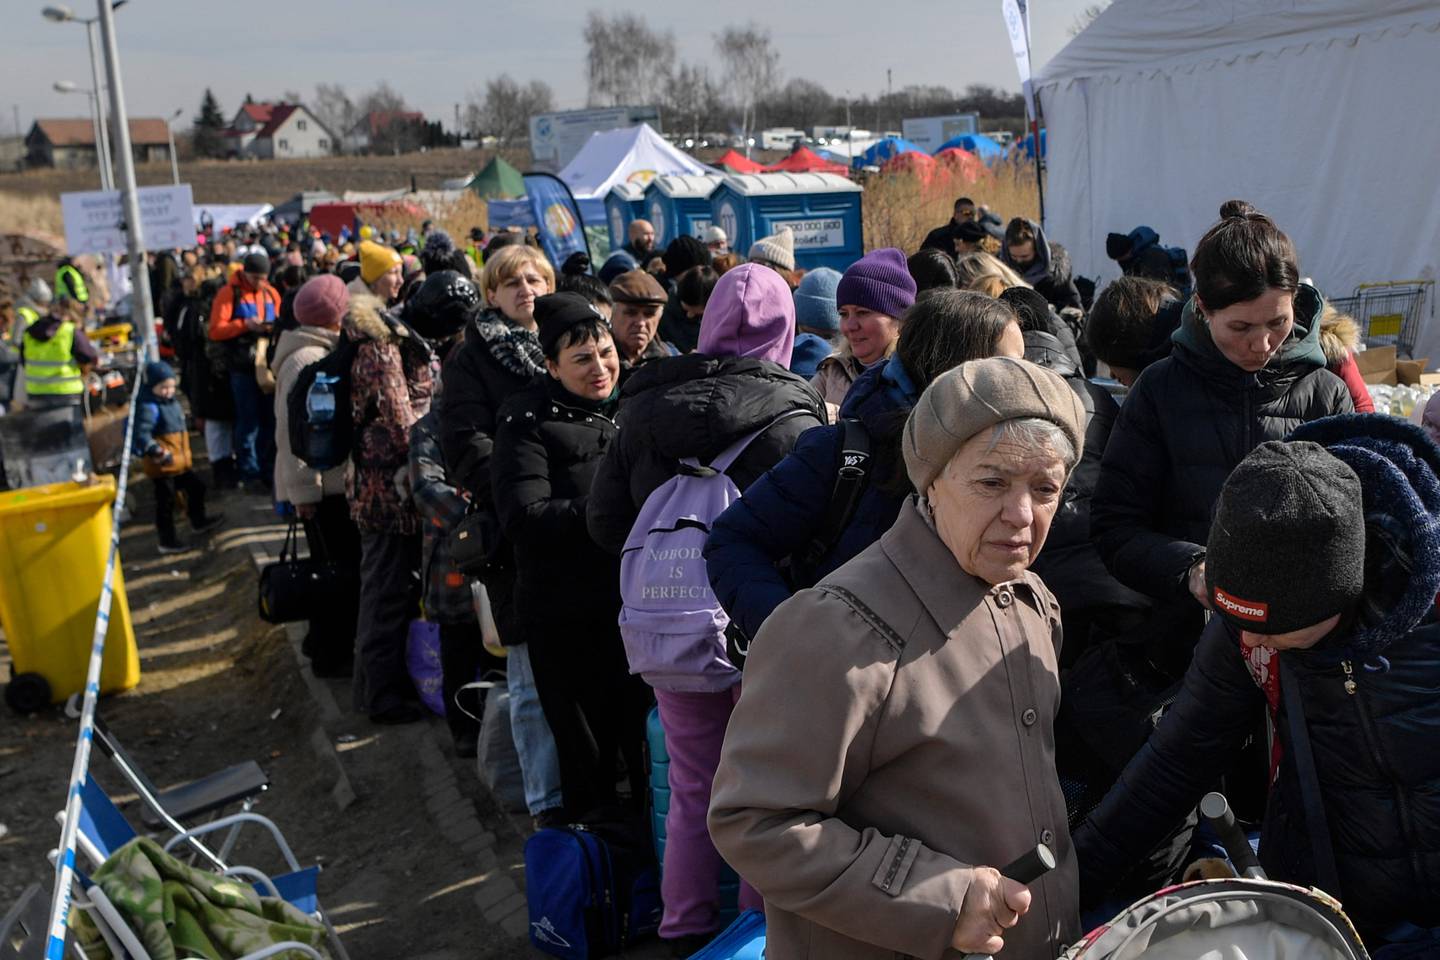 Refugees queue as they wait for further transport at the Medyka border crossing, after crossing at the Ukrainian-Polish border, southeastern Poland on March 12, 2022. - More than two and a half million people have fled the "senseless war" in Ukraine, the UN says -- more than half to Poland. (Photo by Louisa GOULIAMAKI / AFP